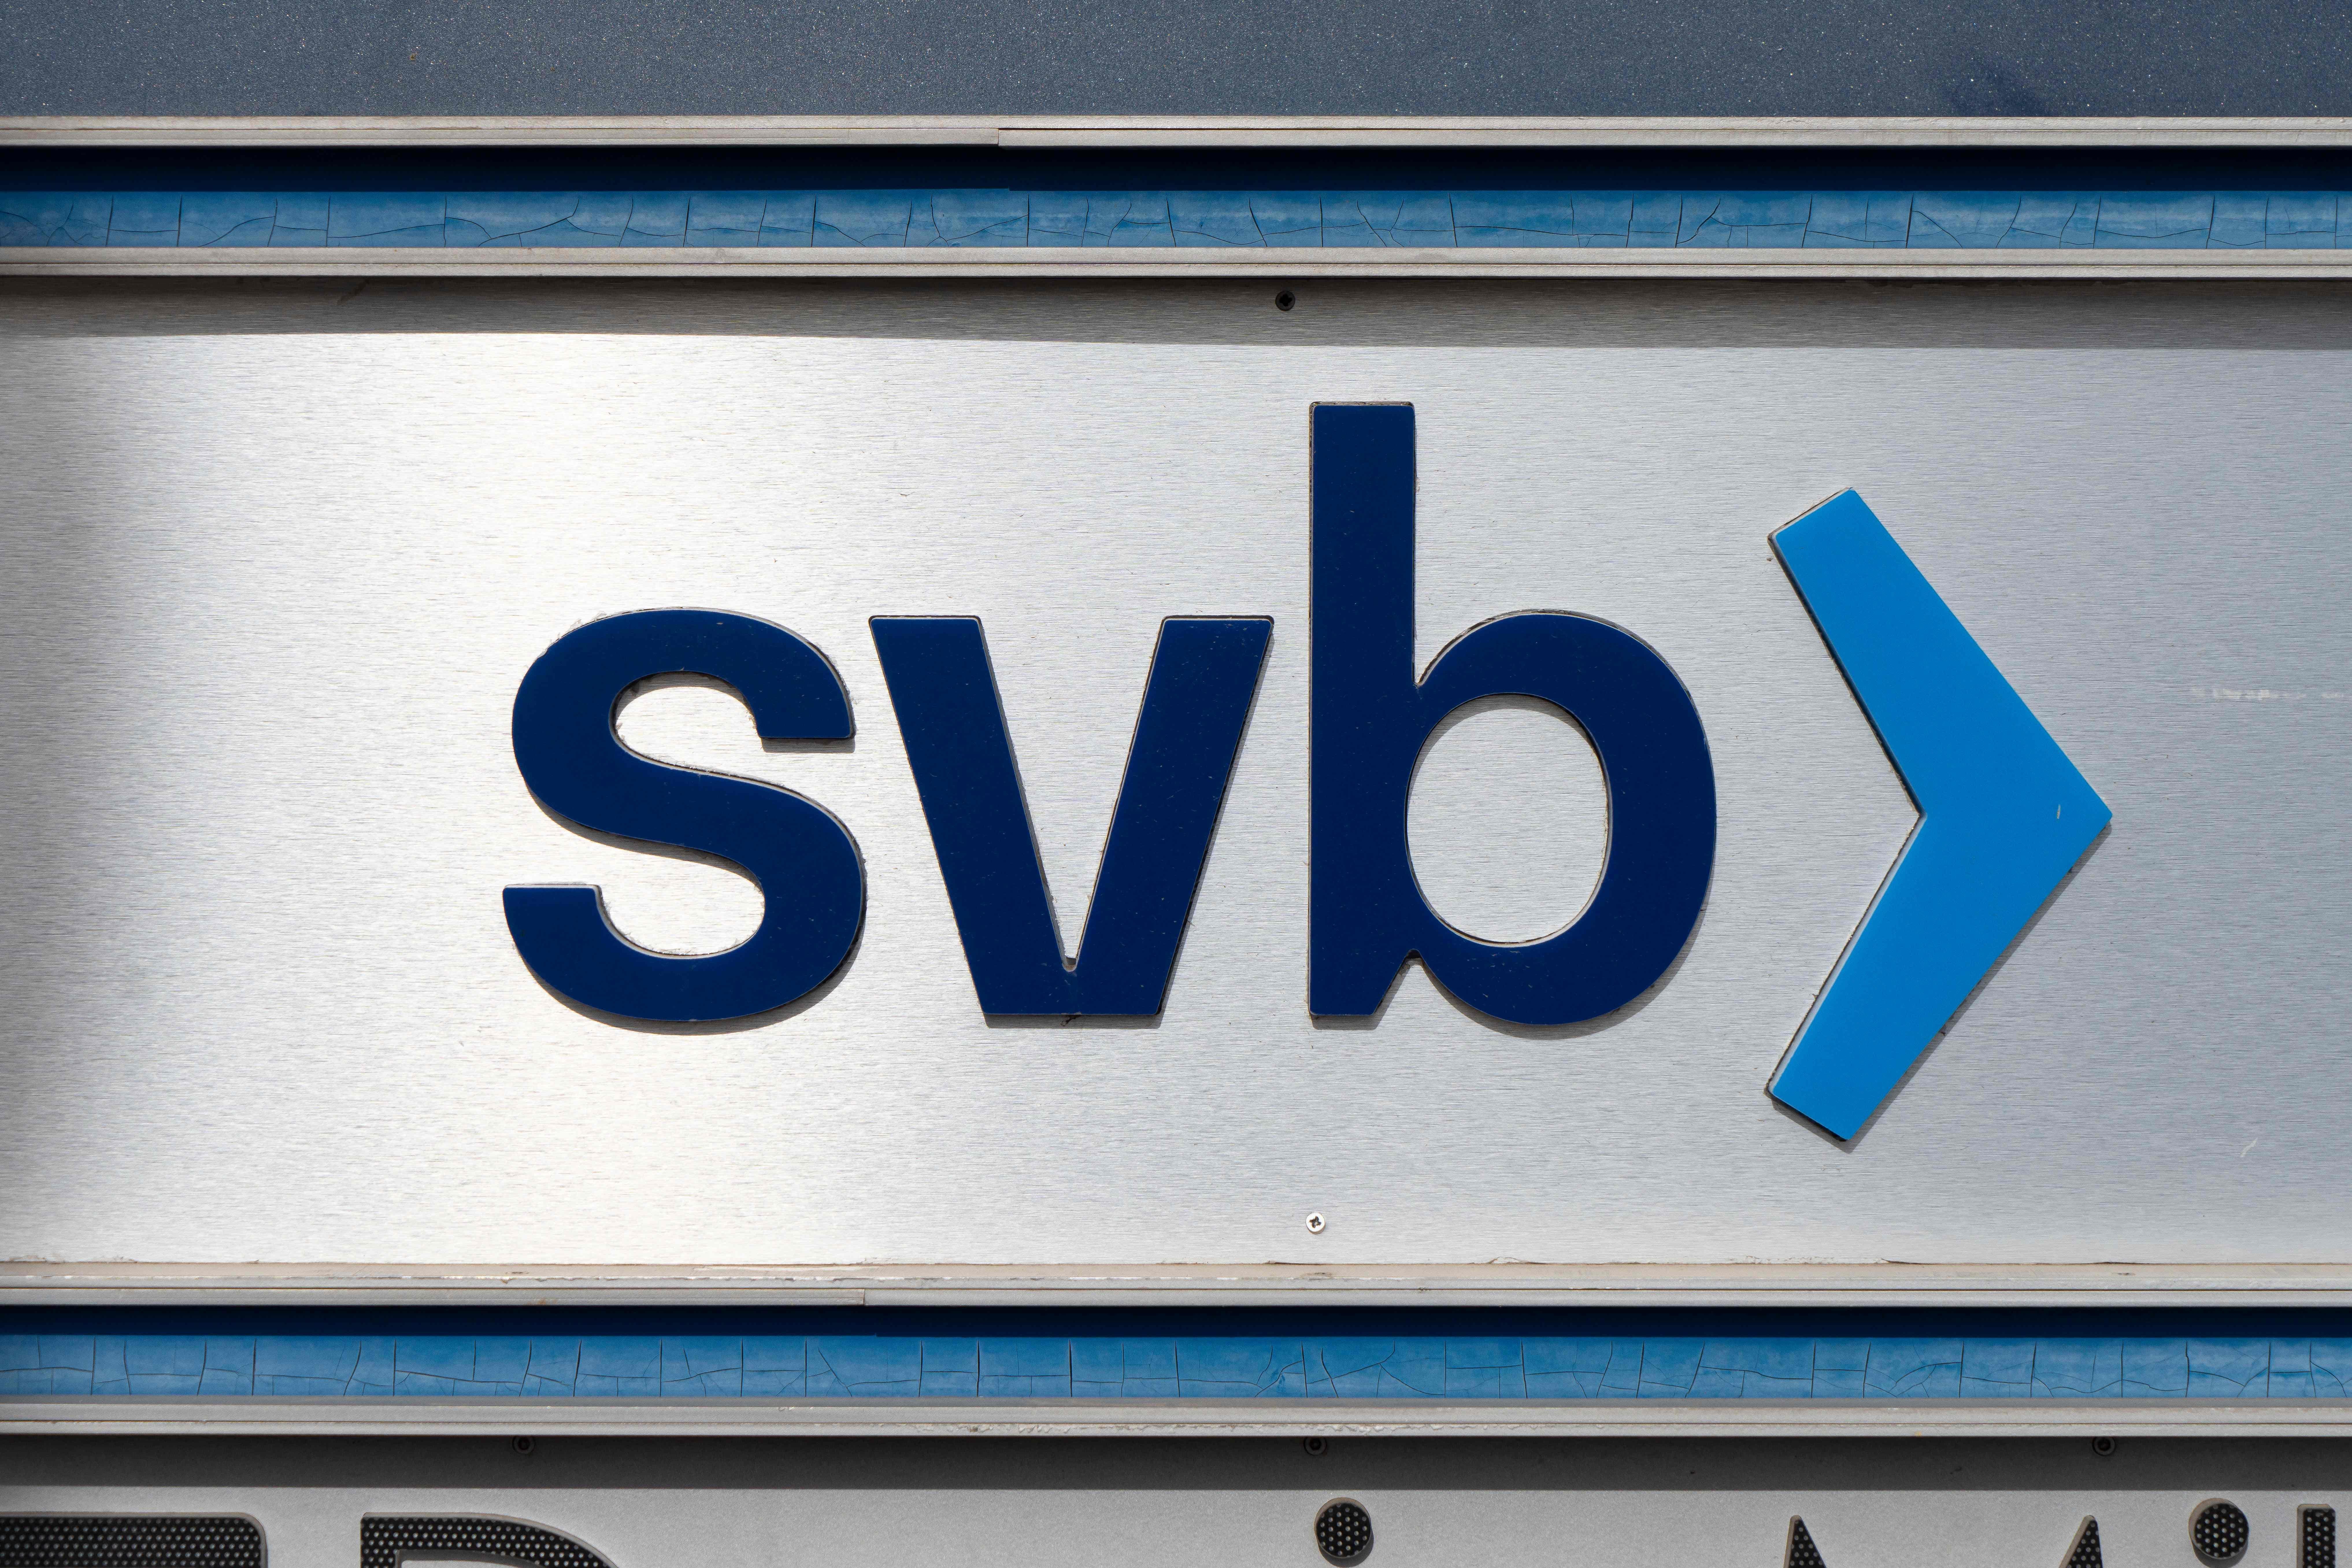 A Silicon Valley Bank logo with the letters SVB and an arrow pointing to the right